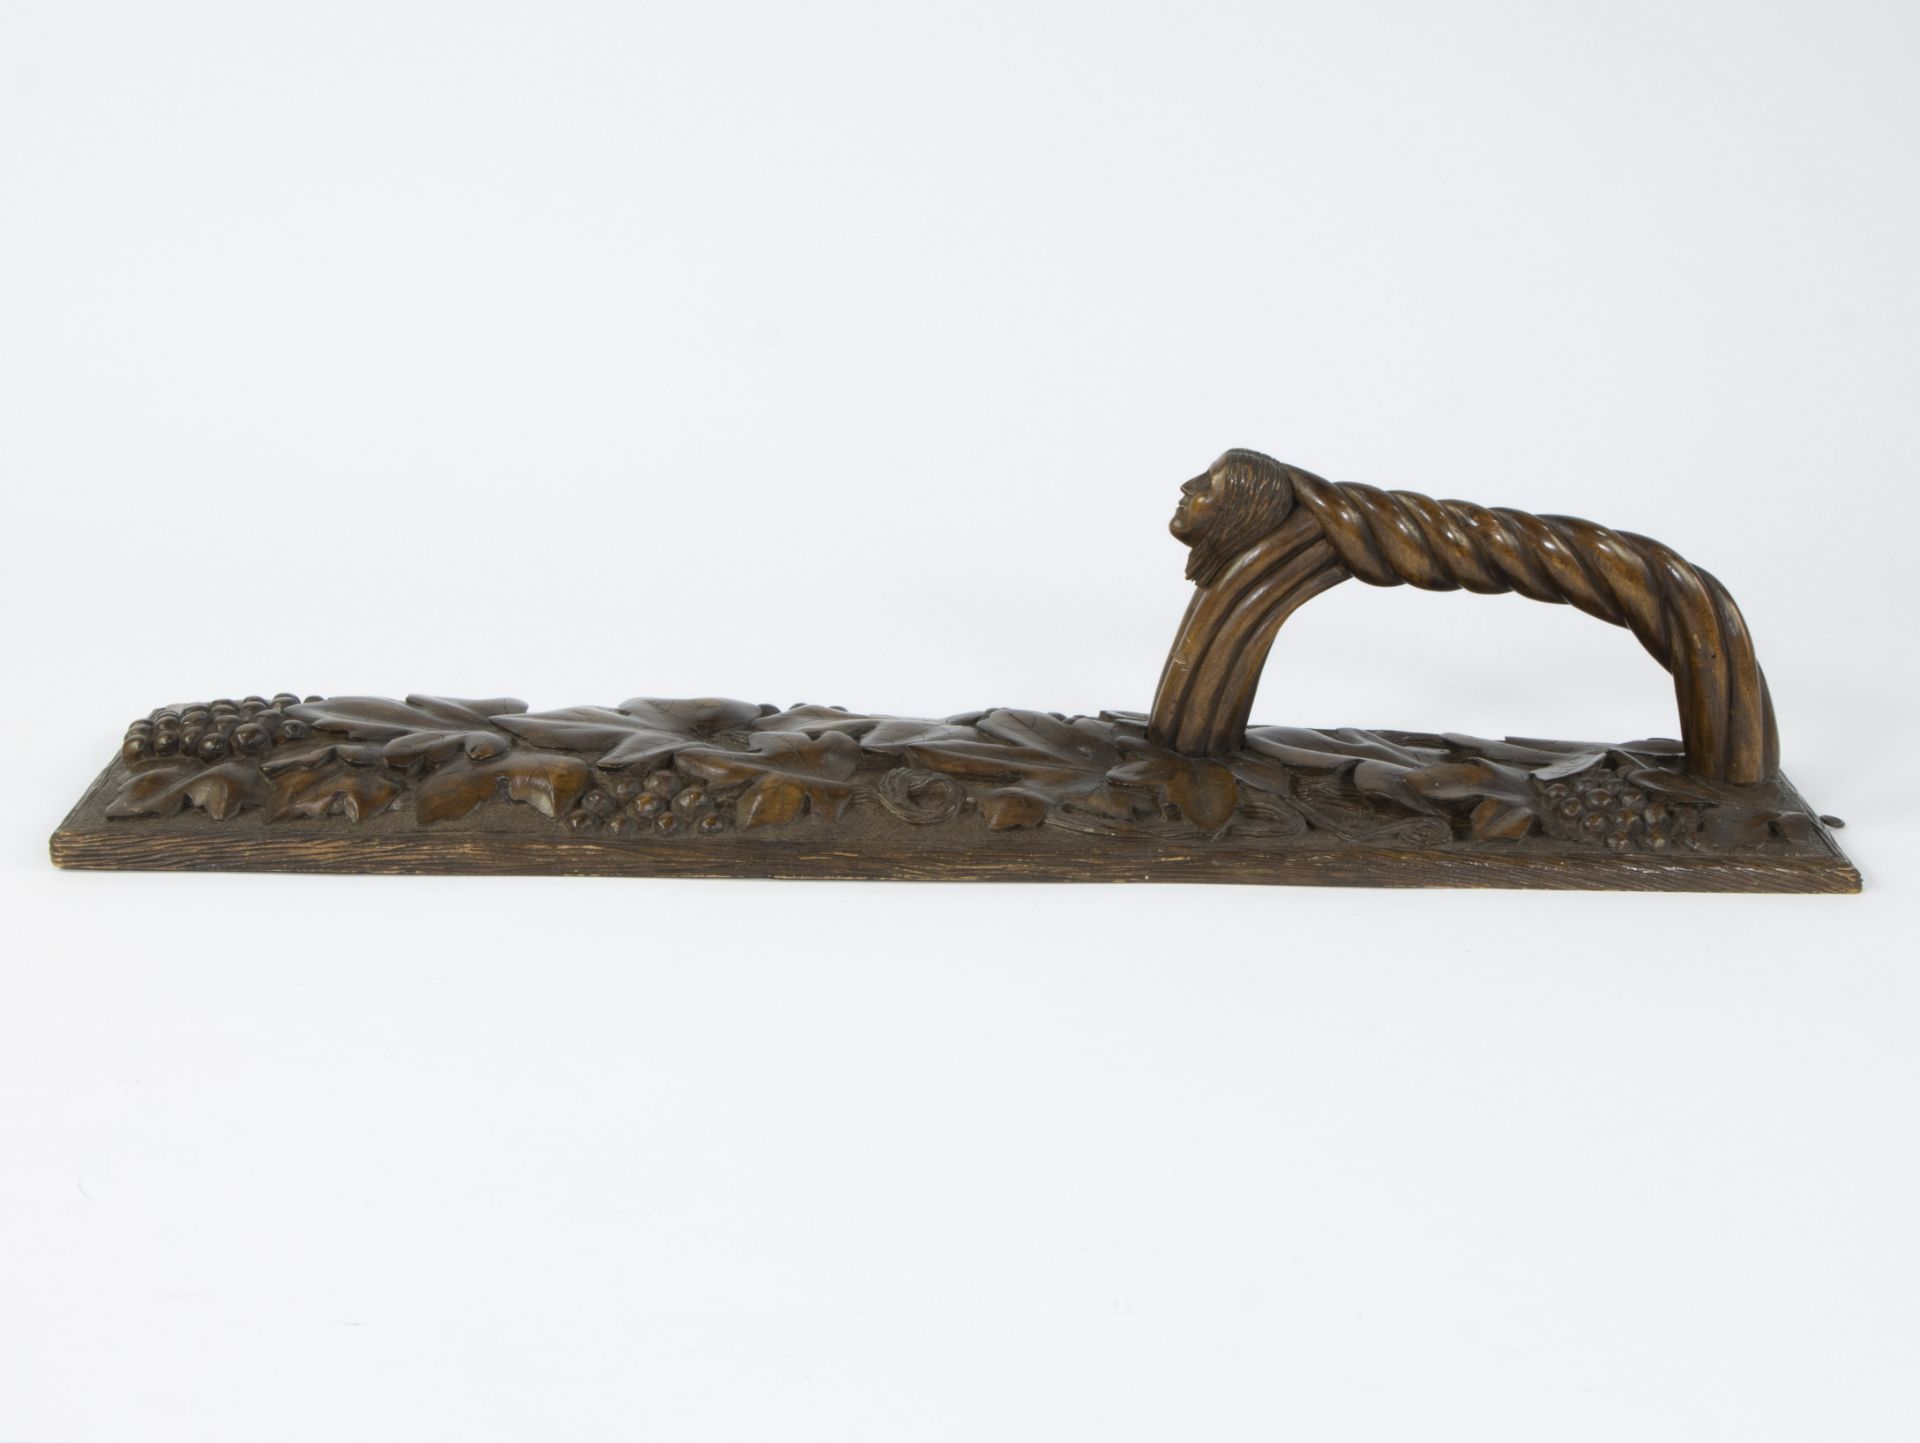 Mangle board with relief decorations, twisted handle with man's head, German, 19th century - Bild 2 aus 4